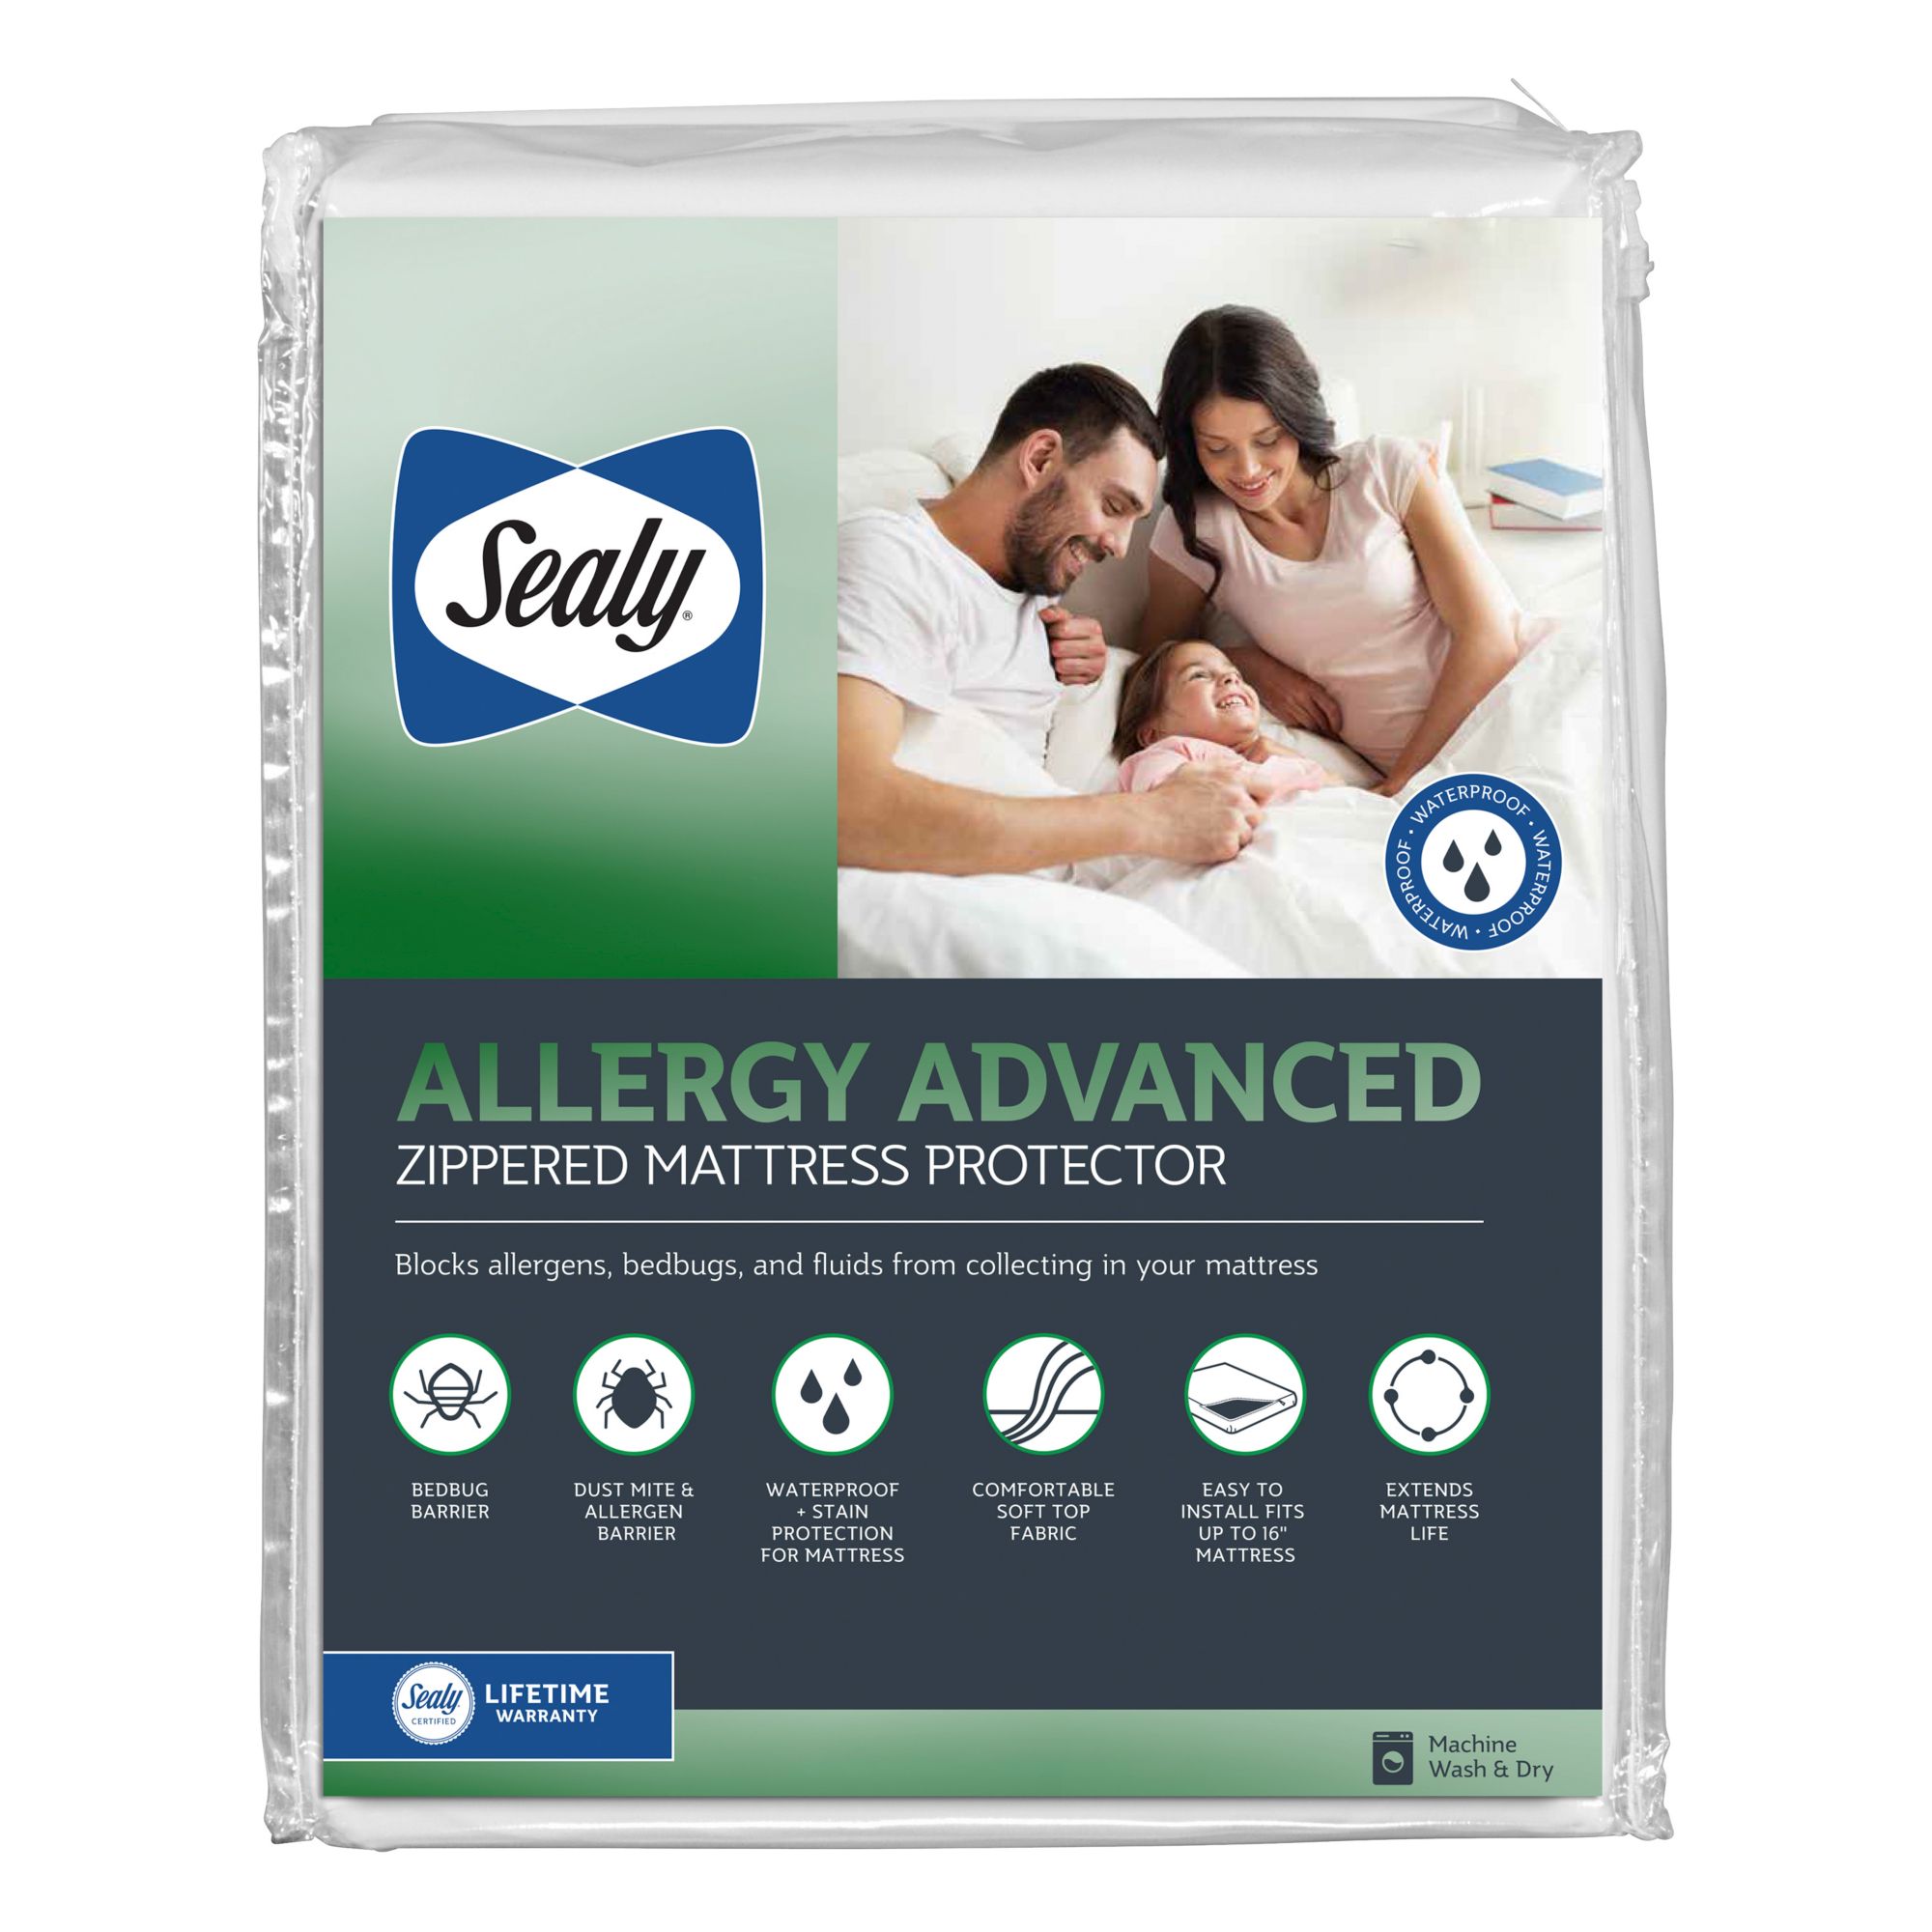 Sealy 3 SealyChill Gel Memory Foam Queen Size Mattress Topper with Cover